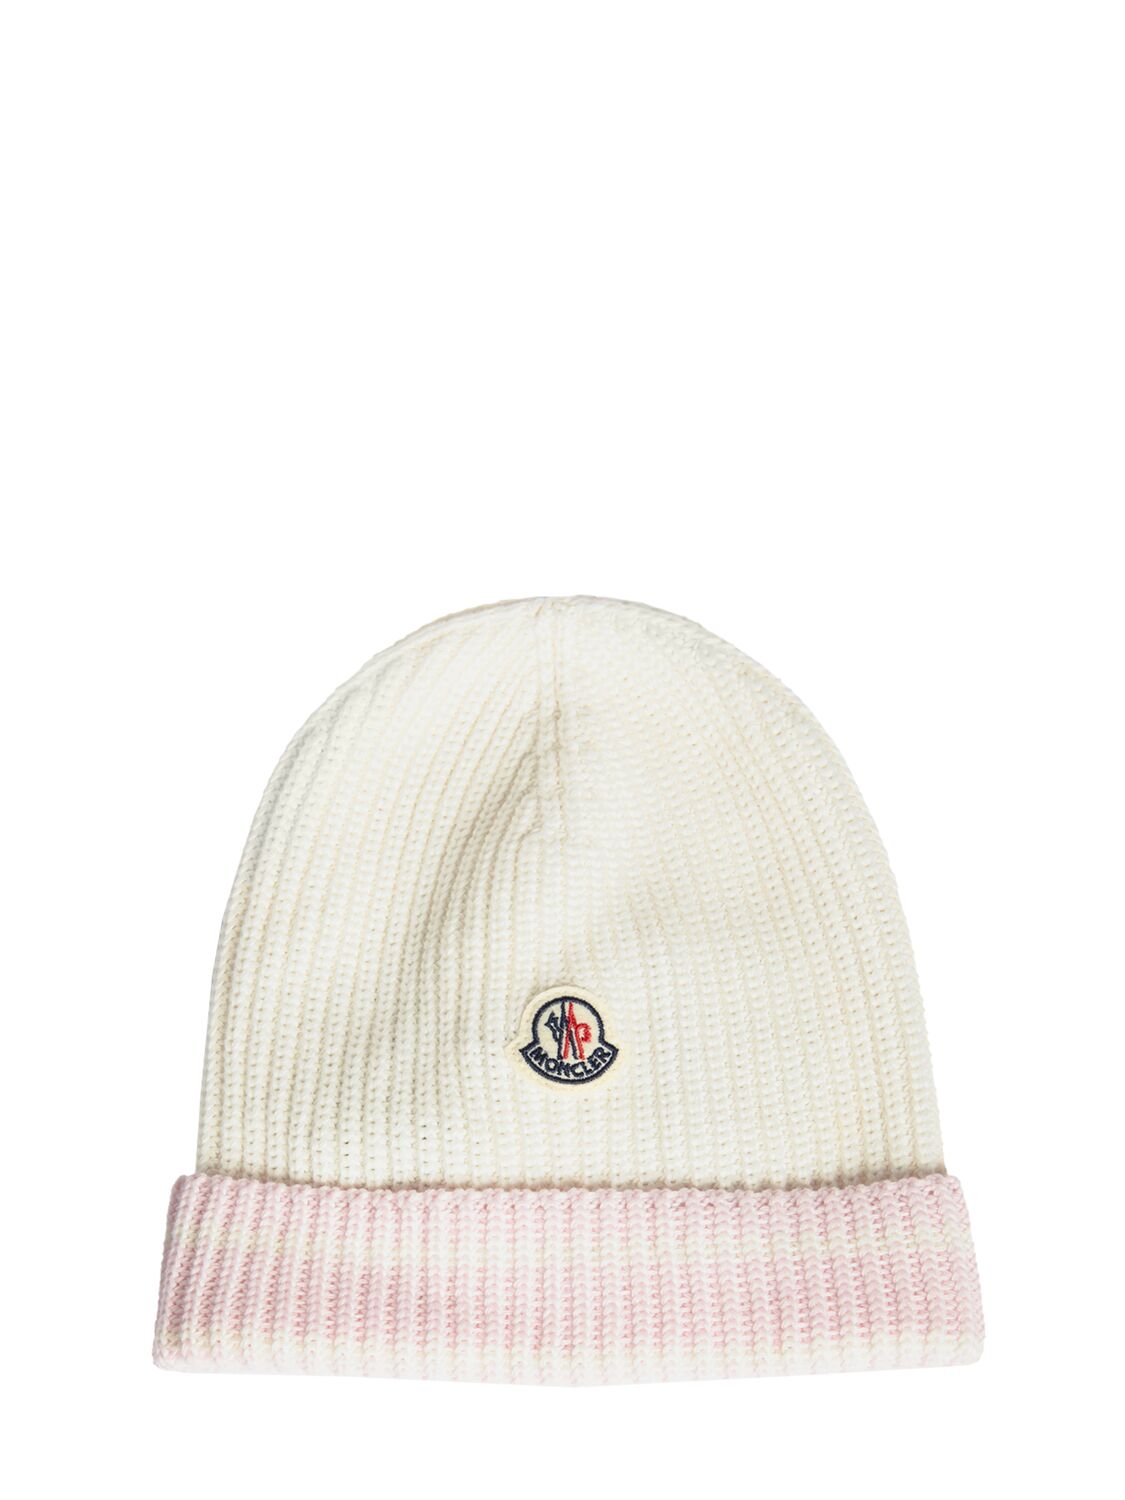 Image of Cotton Knit Beanie